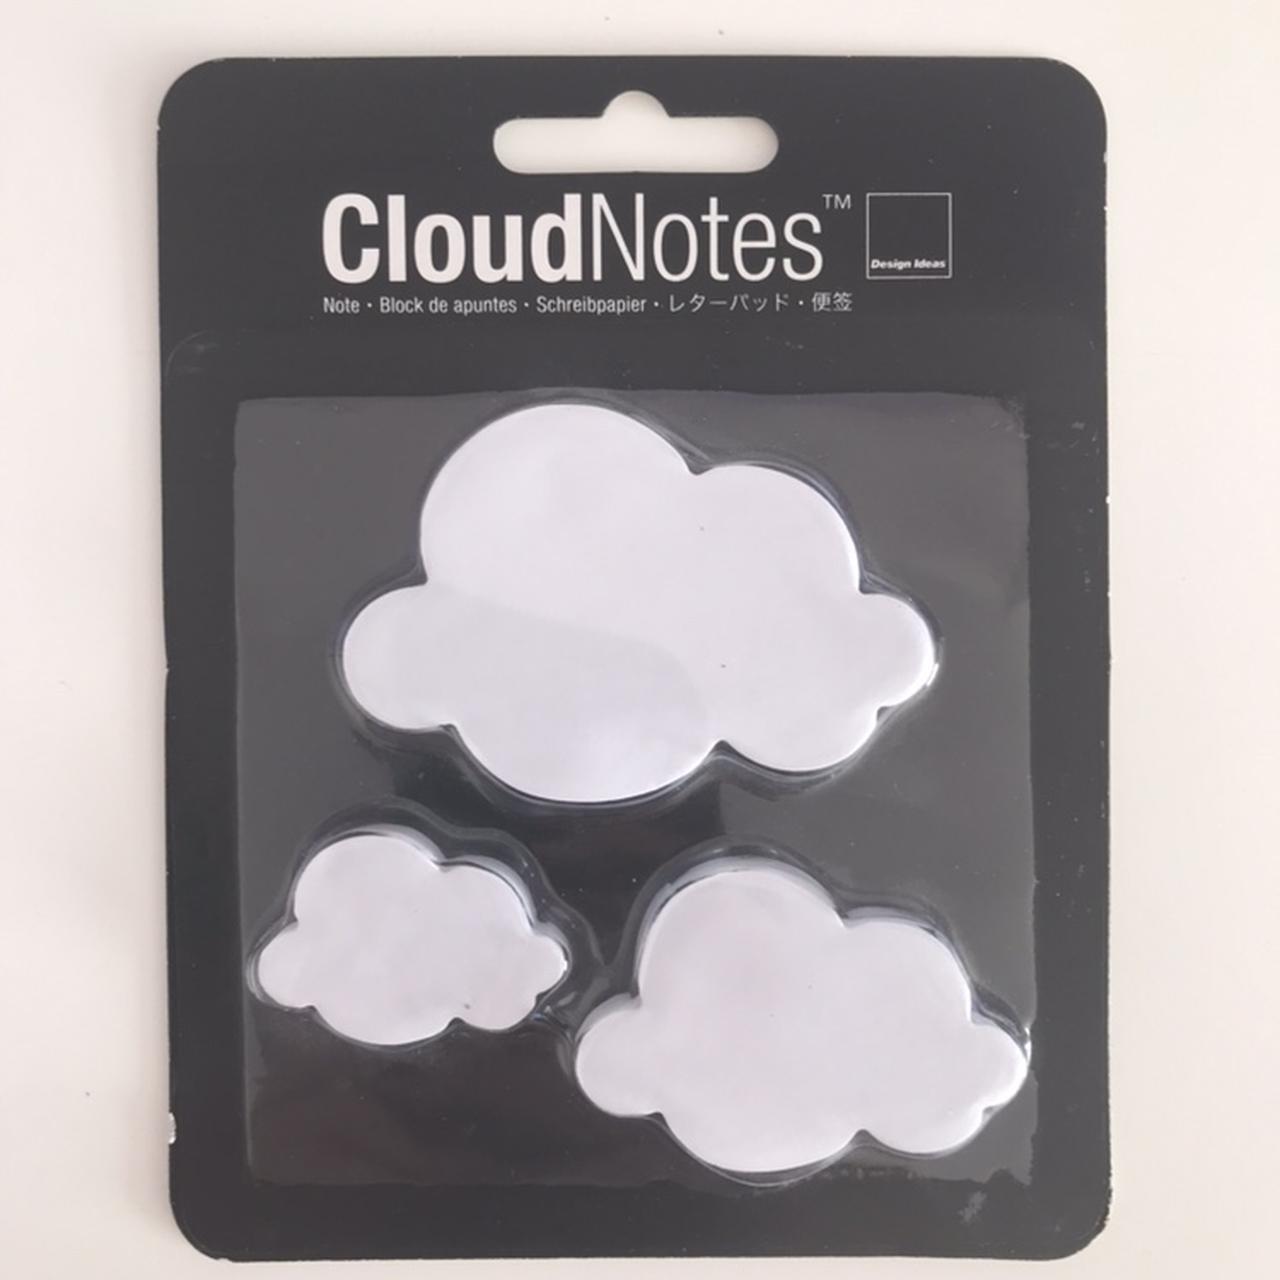 NEWWW cloud shaped sticky notes are available in our shop now